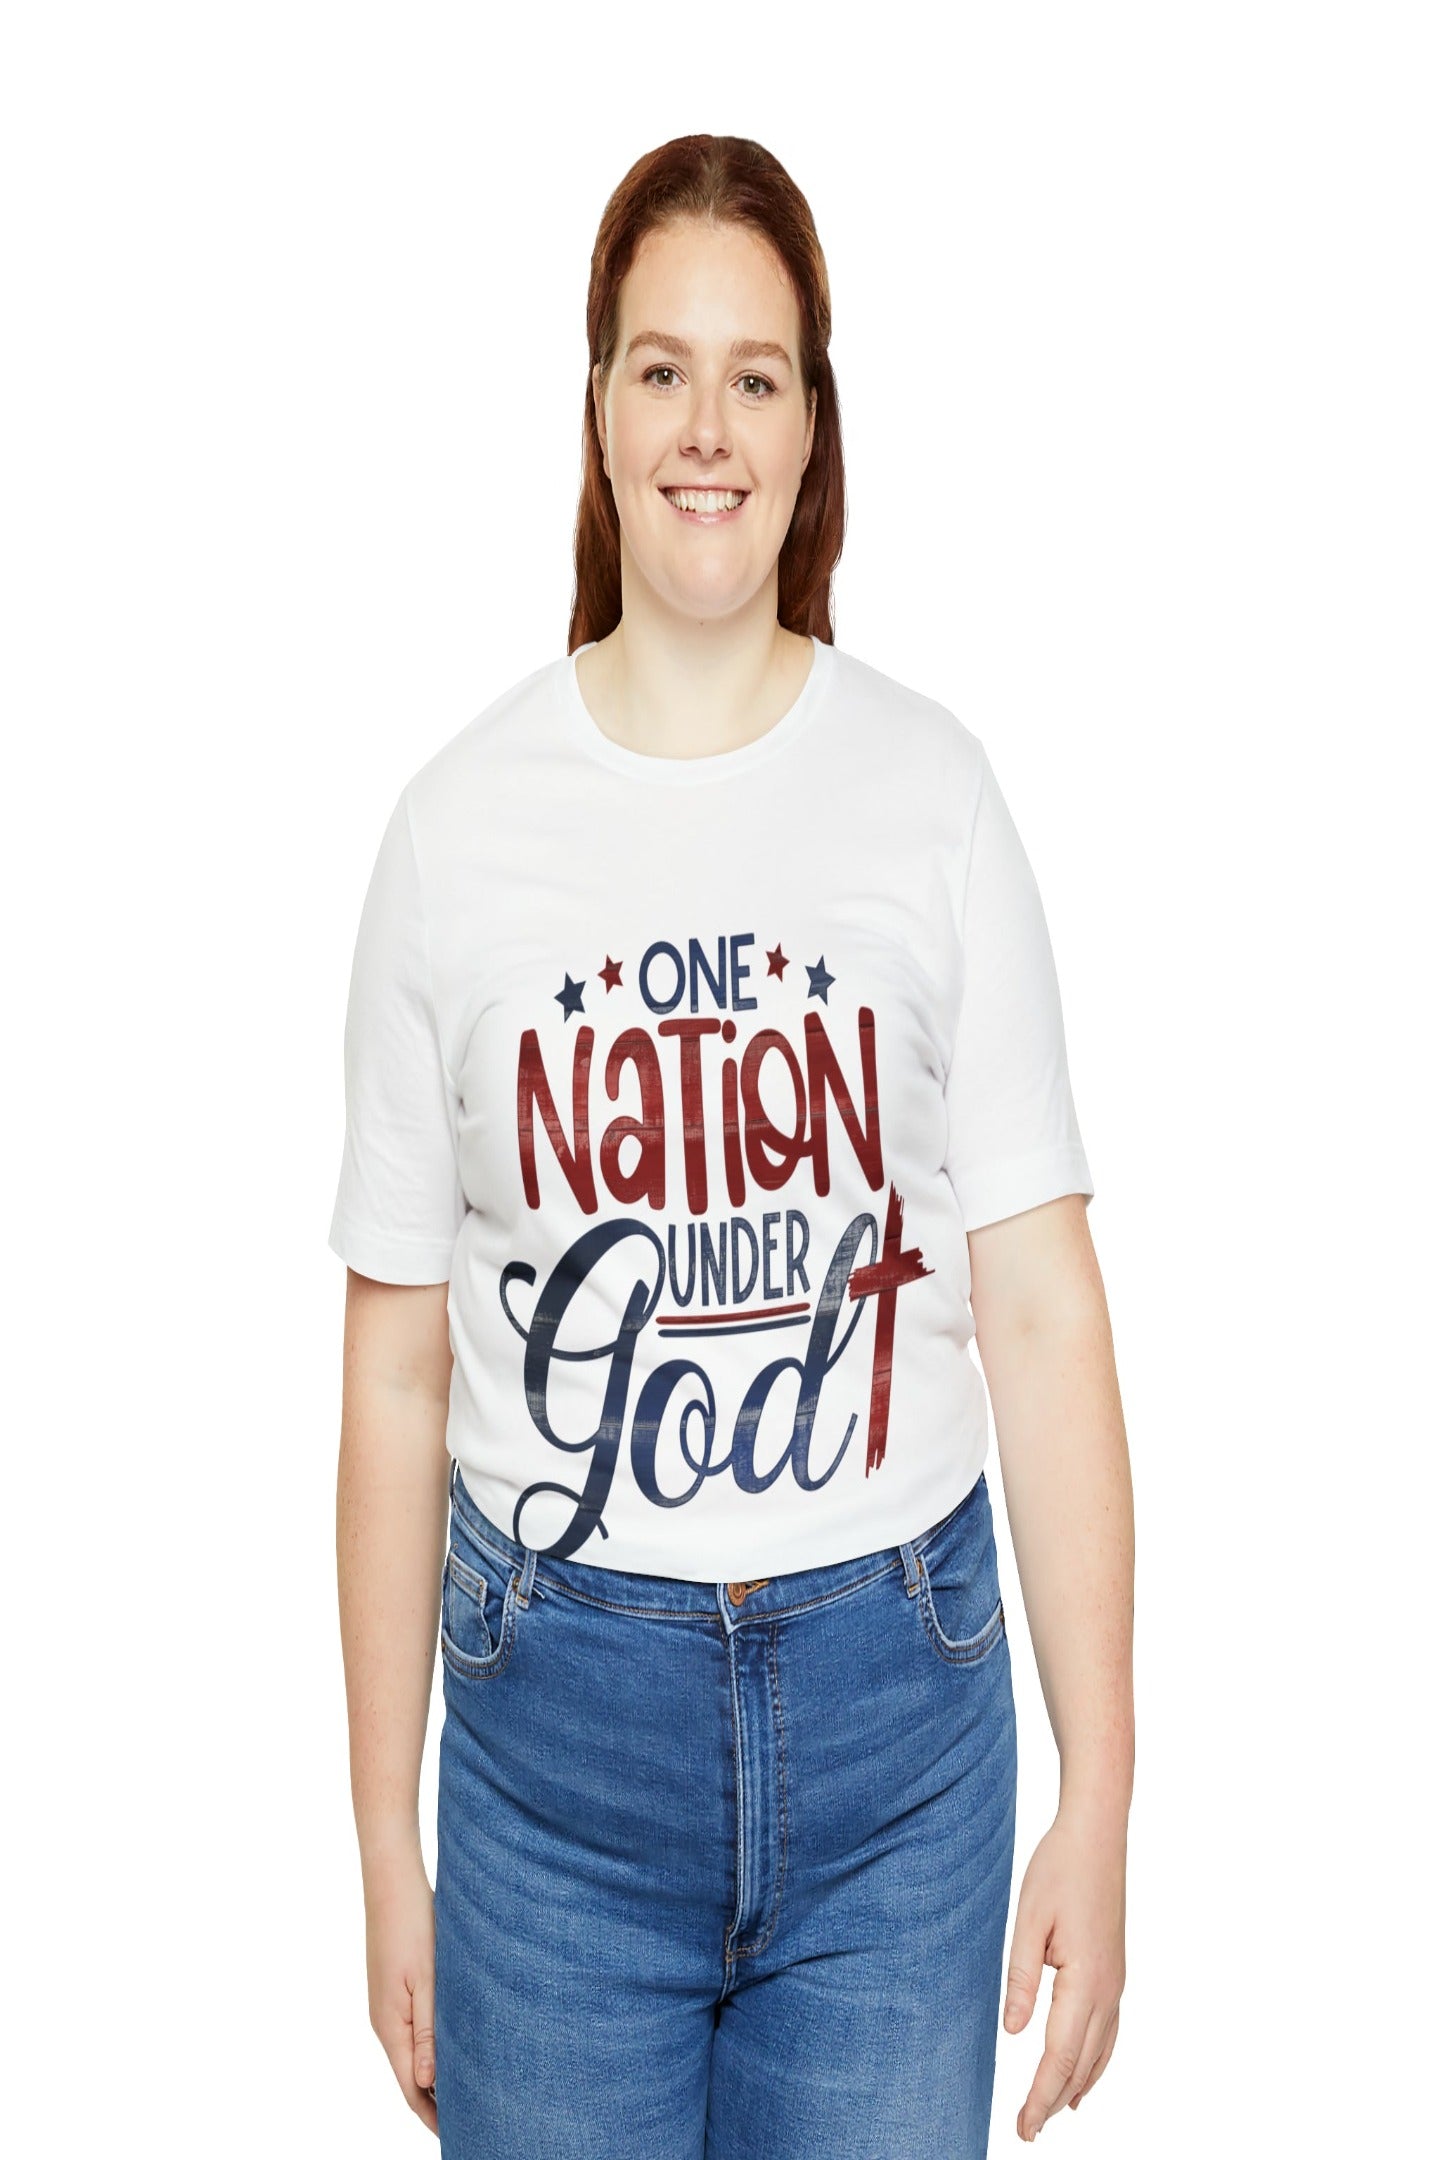 Patriotic Short Sleeve V-Neck Women's Jersey Tee - Shopping Therapy T-Shirt